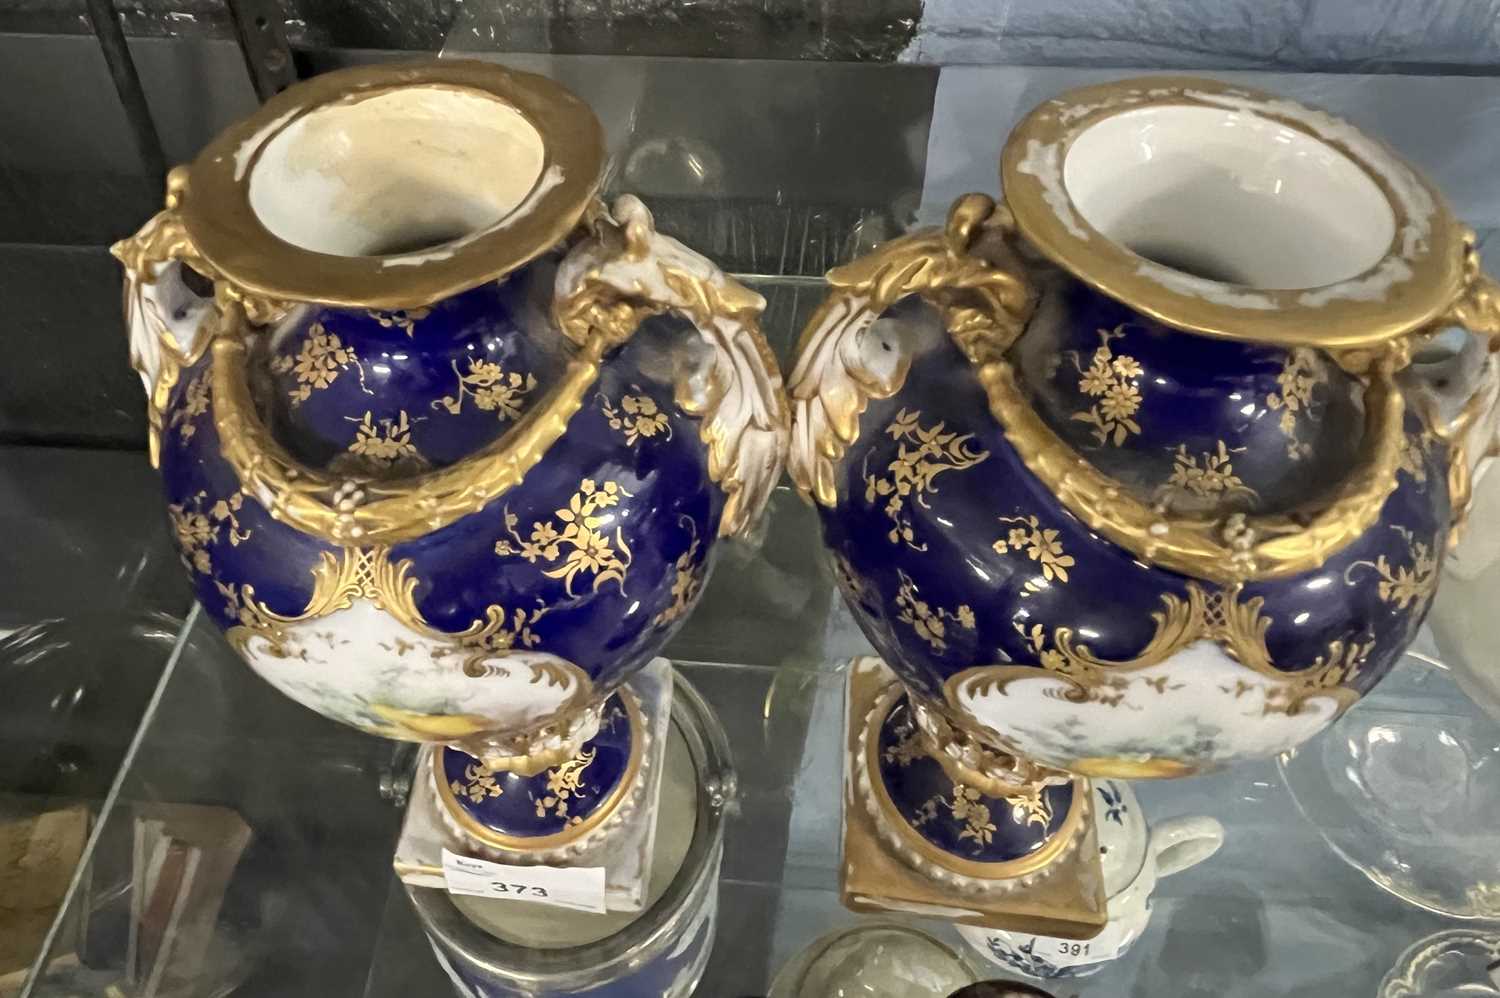 Royal Worcester Fruit Vases by Chivers - Image 9 of 16